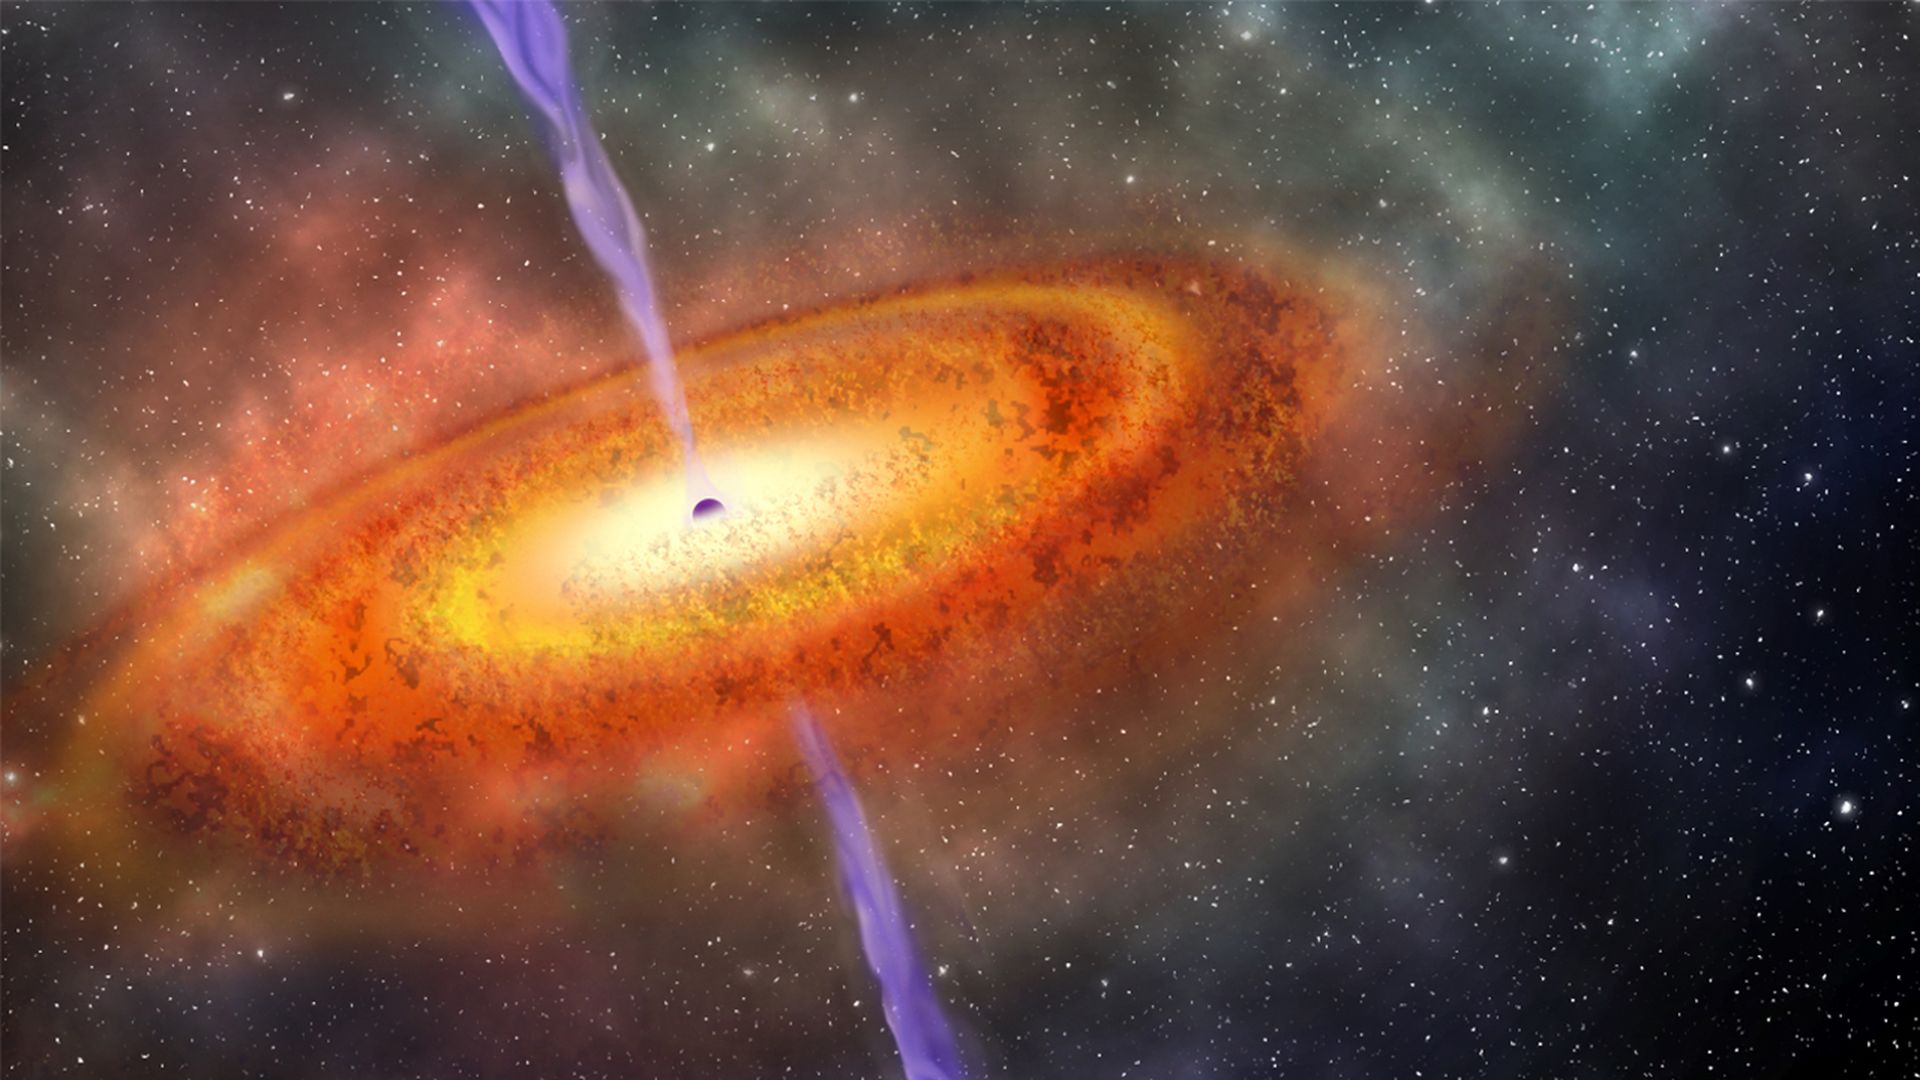 Artist’s conception of the most-distant supermassive black hole ever discovered.